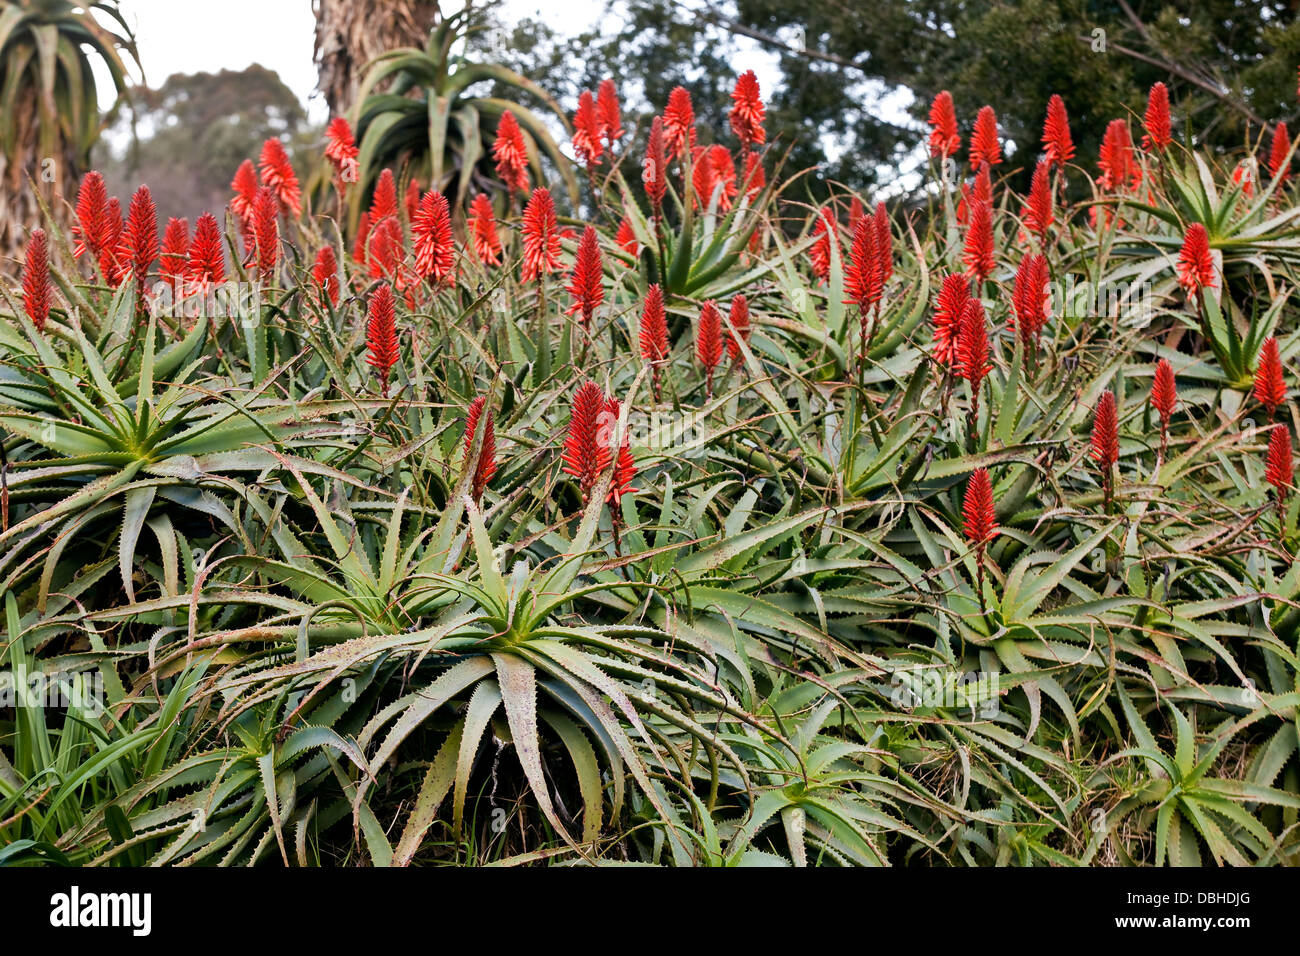 A cluster of large, spiky-leaved aloe plants with bright red flowers. Stock Photo